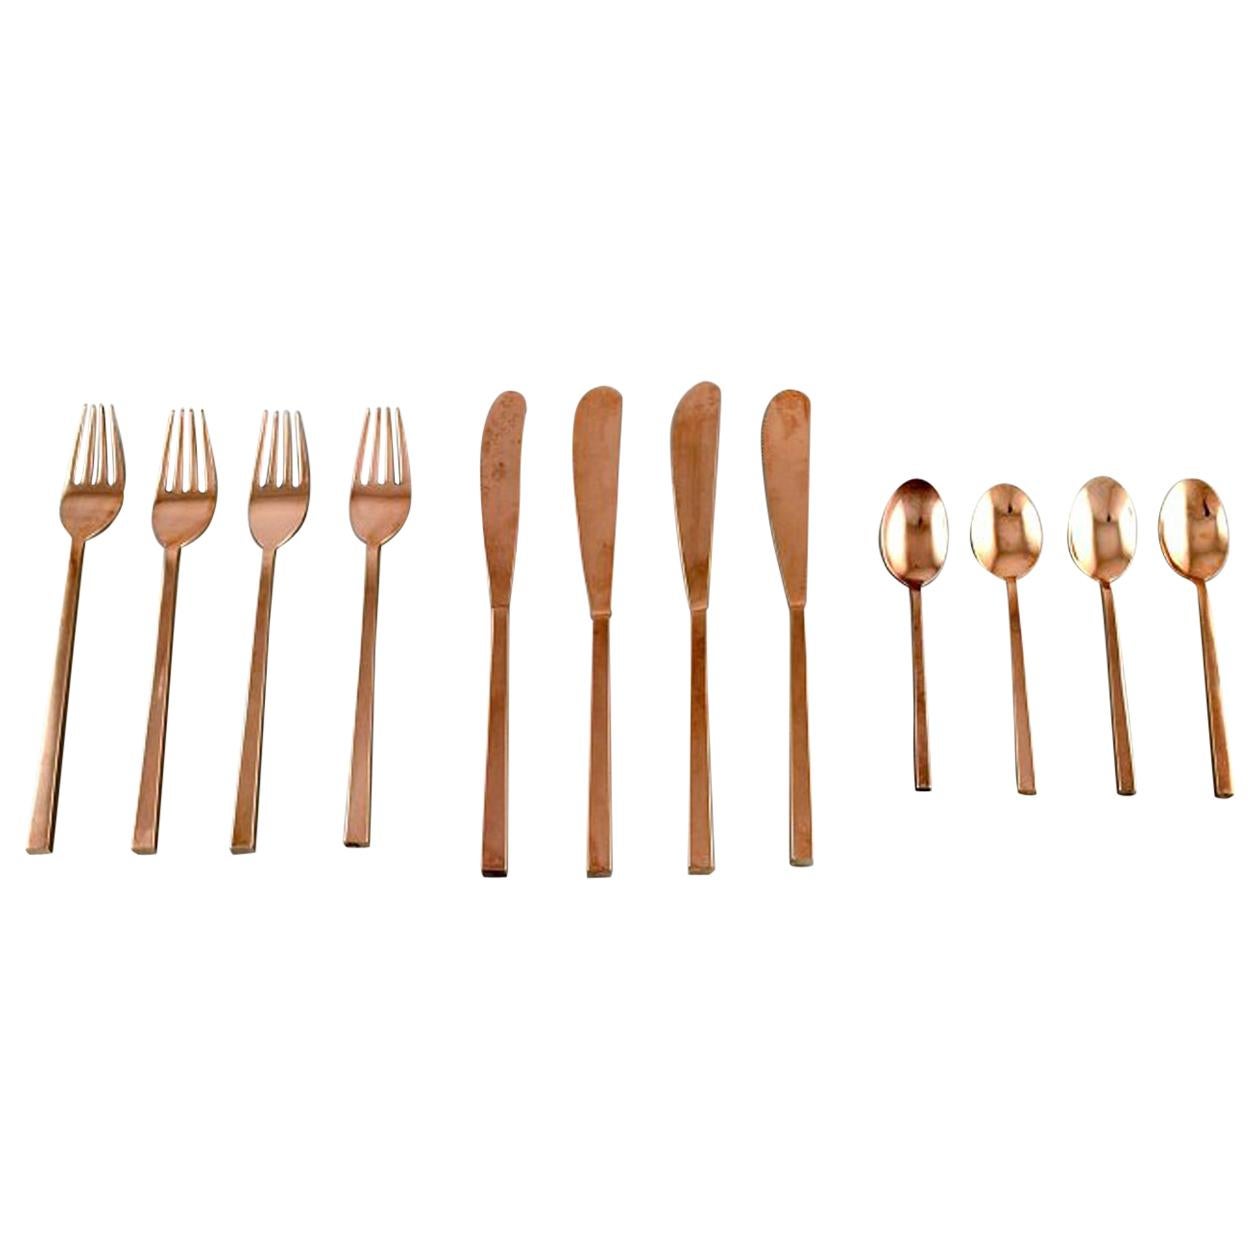 Sigvard Bernadotte 'Scanline' Cutlery in brass Complete for 4 Persons